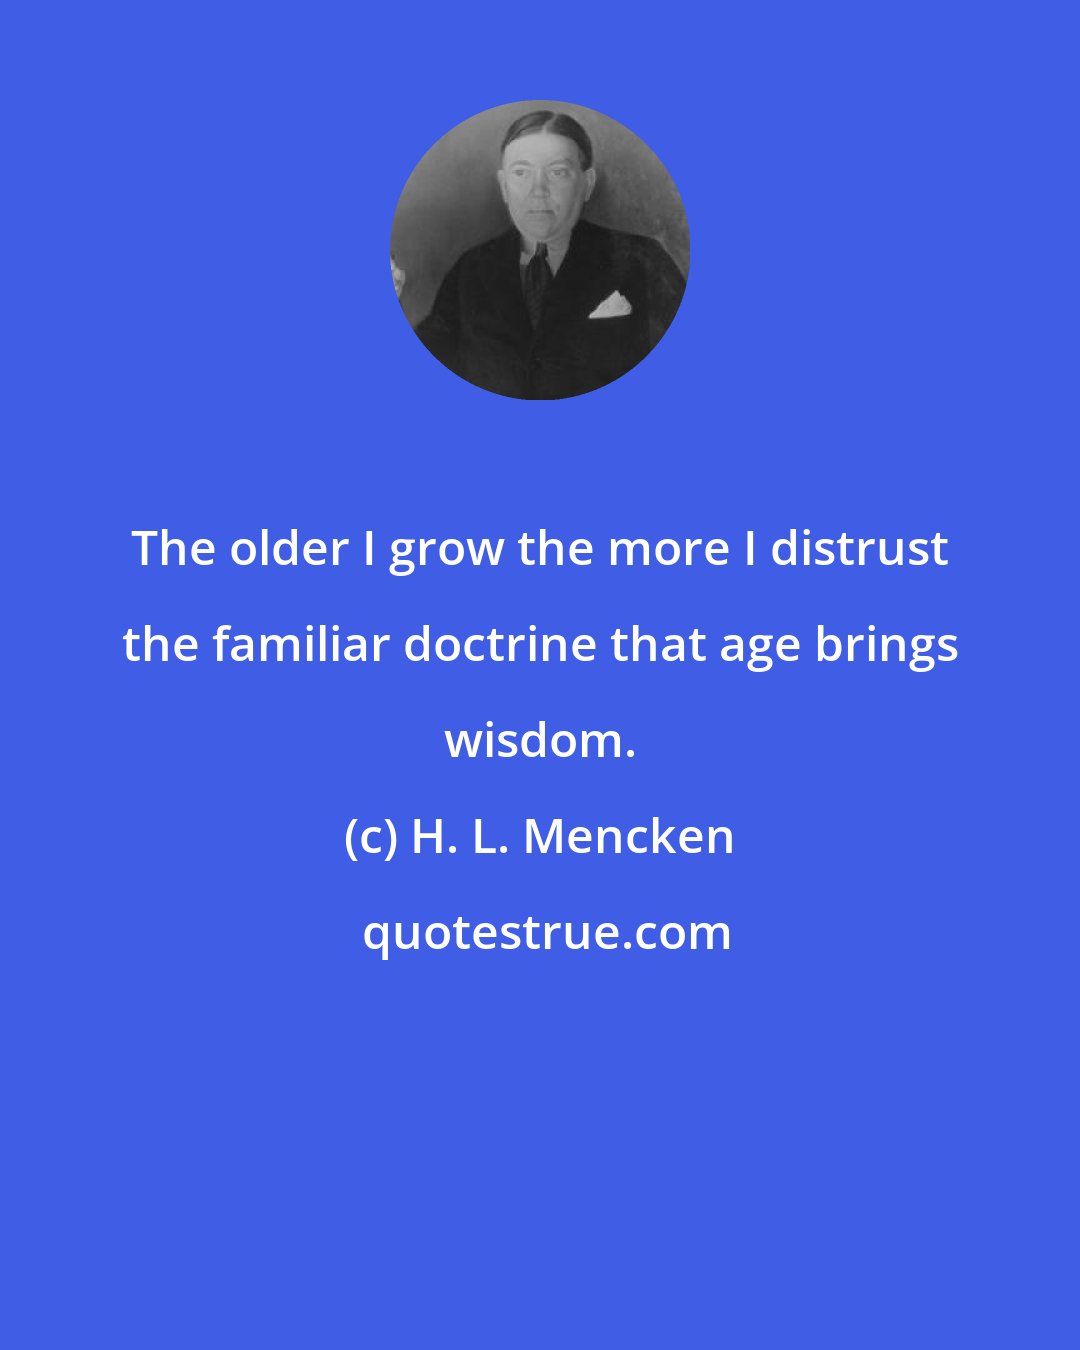 H. L. Mencken: The older I grow the more I distrust the familiar doctrine that age brings wisdom.